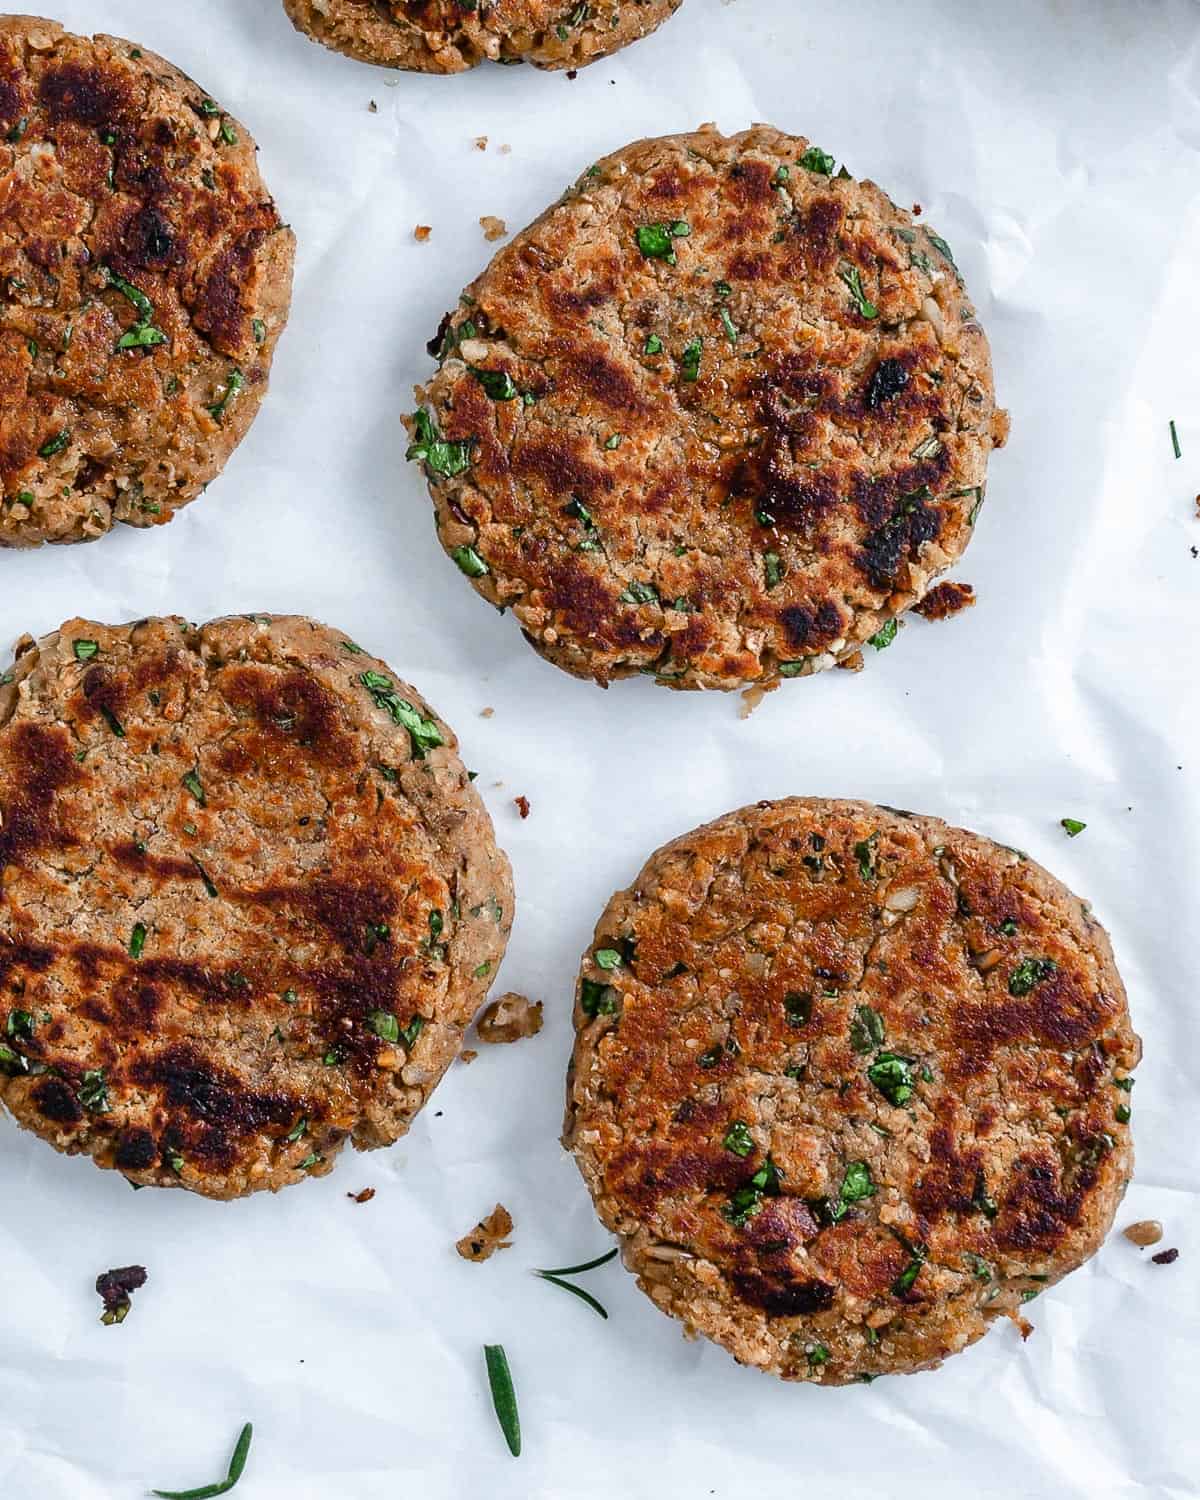 4 completed White Bean Burger patties against white surface